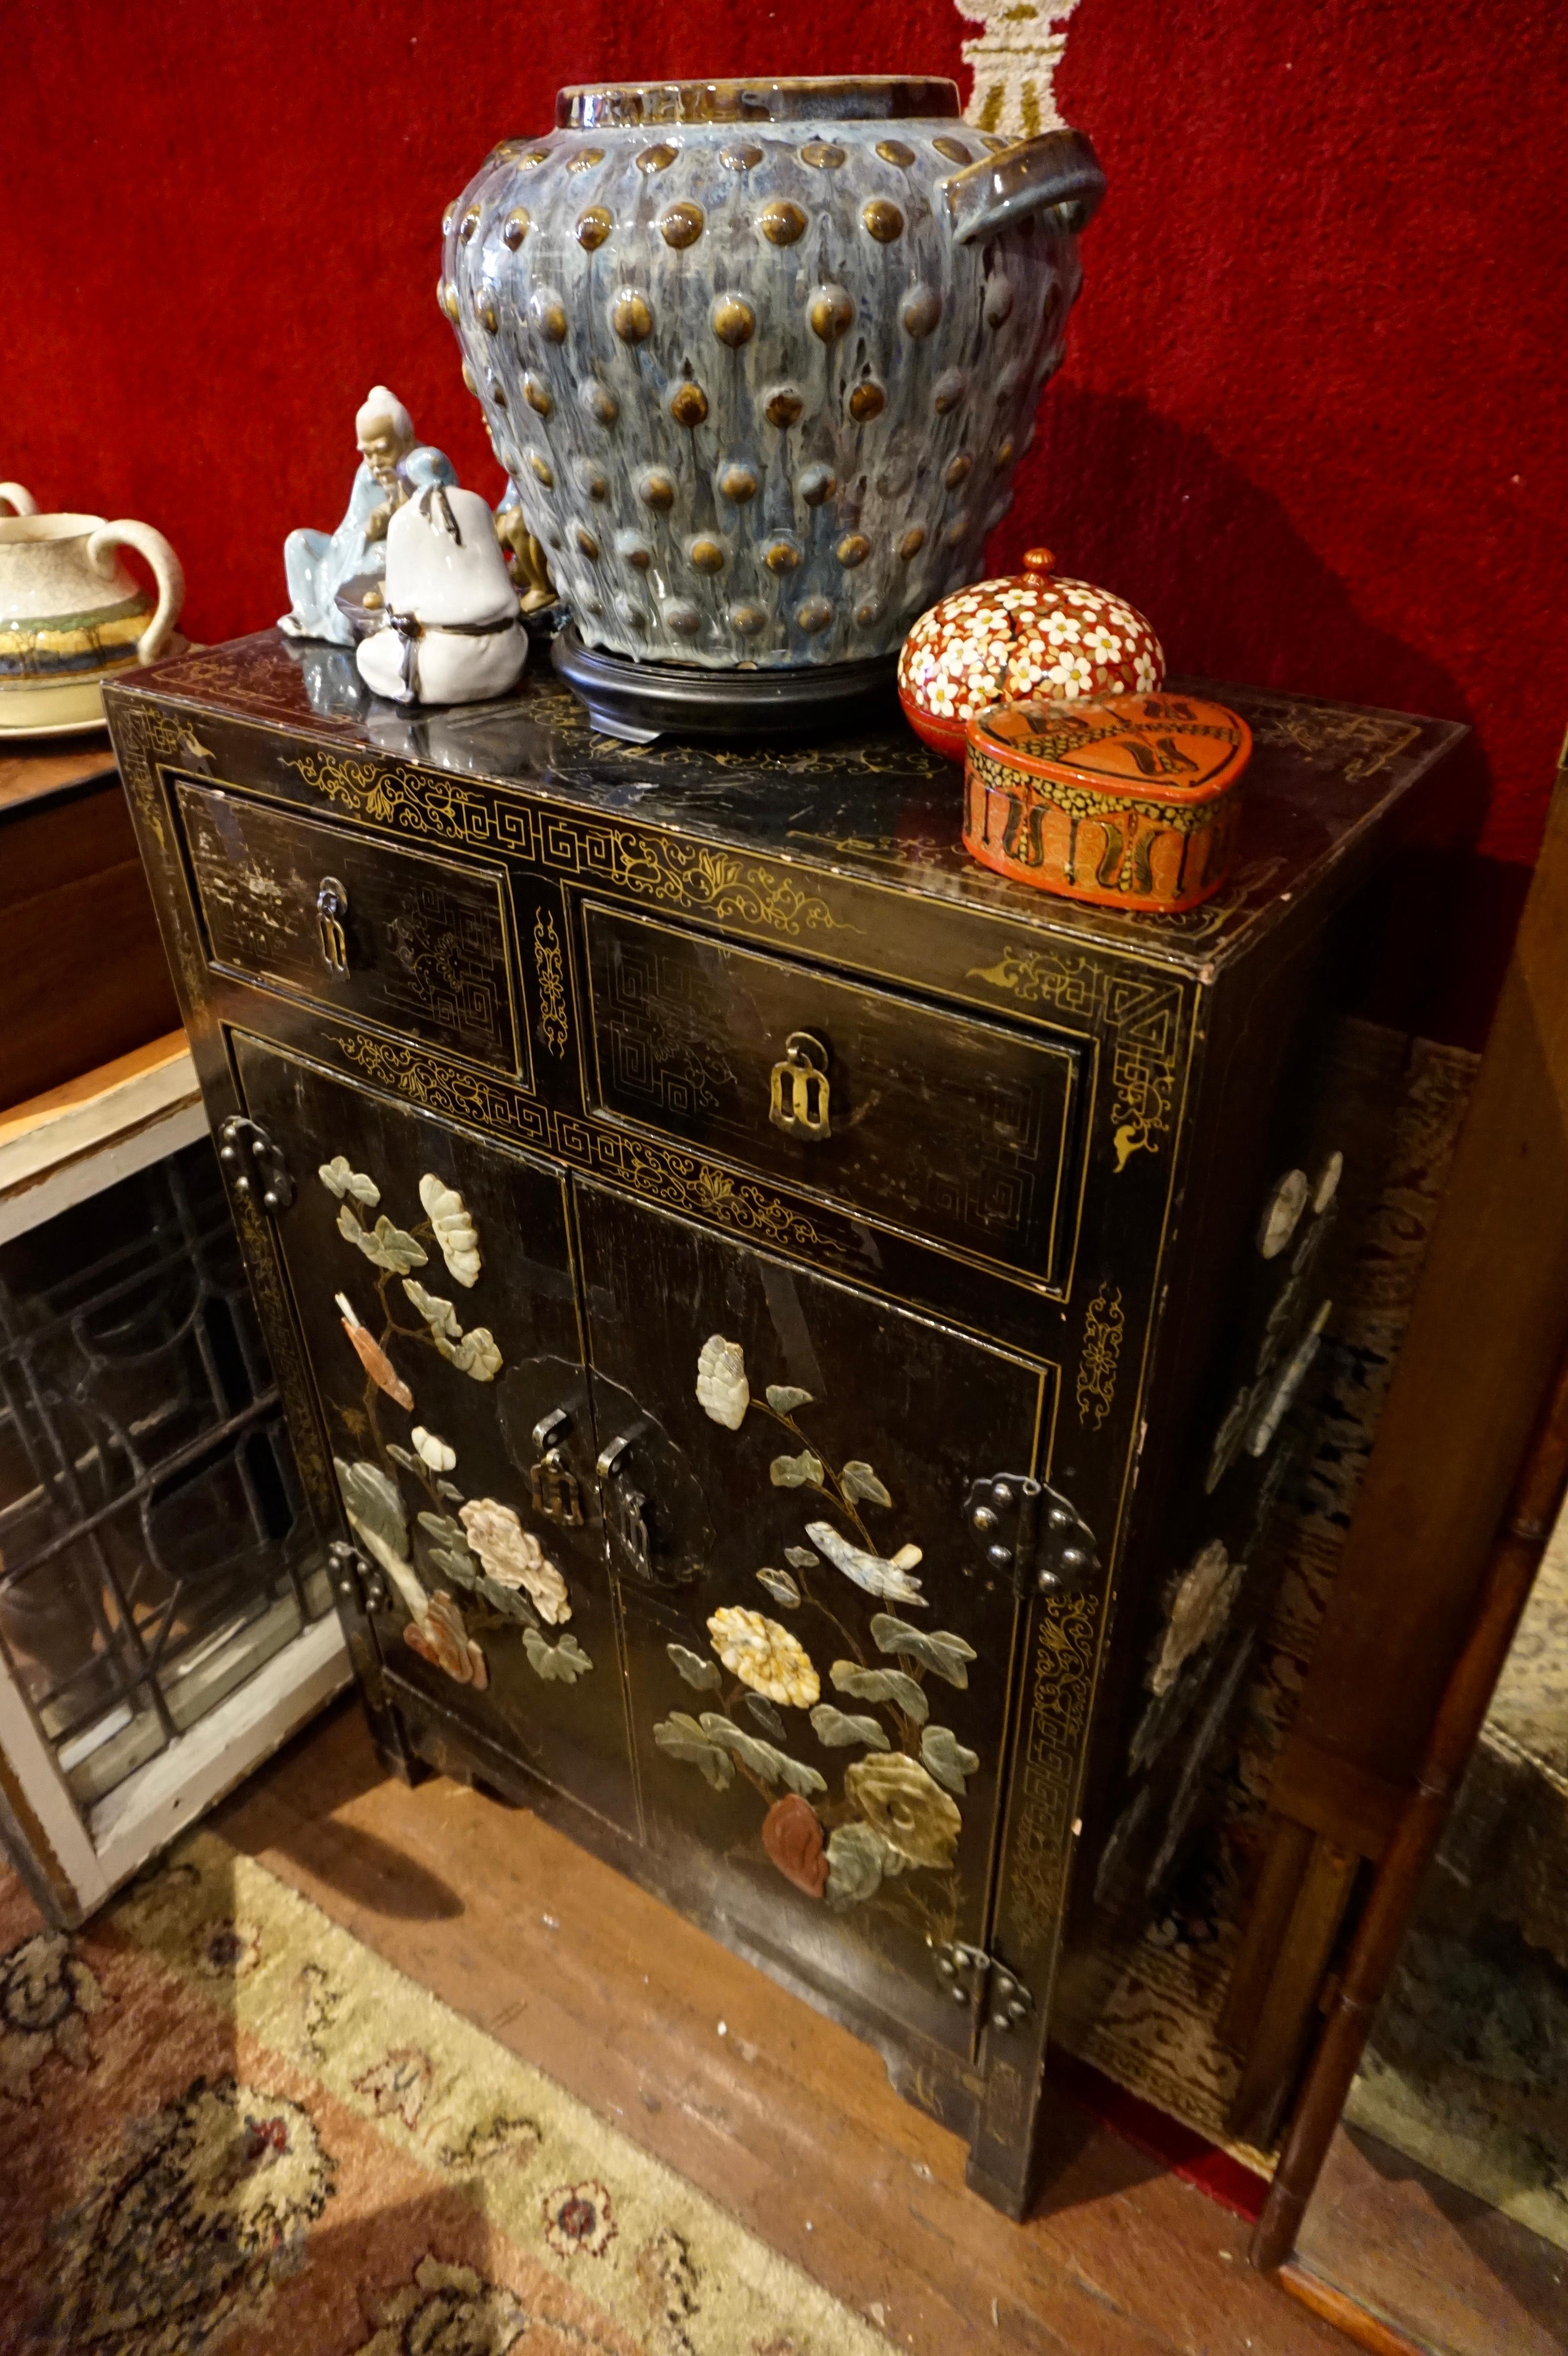 Compact, decorative Chinese export cabinet circa 1940's. Fine gilt work on black lacquer with soapstone carvings of birds in spring. This piece came out of the Estate of a Chinese diplomat and was hastily taped before being shipped overseas years